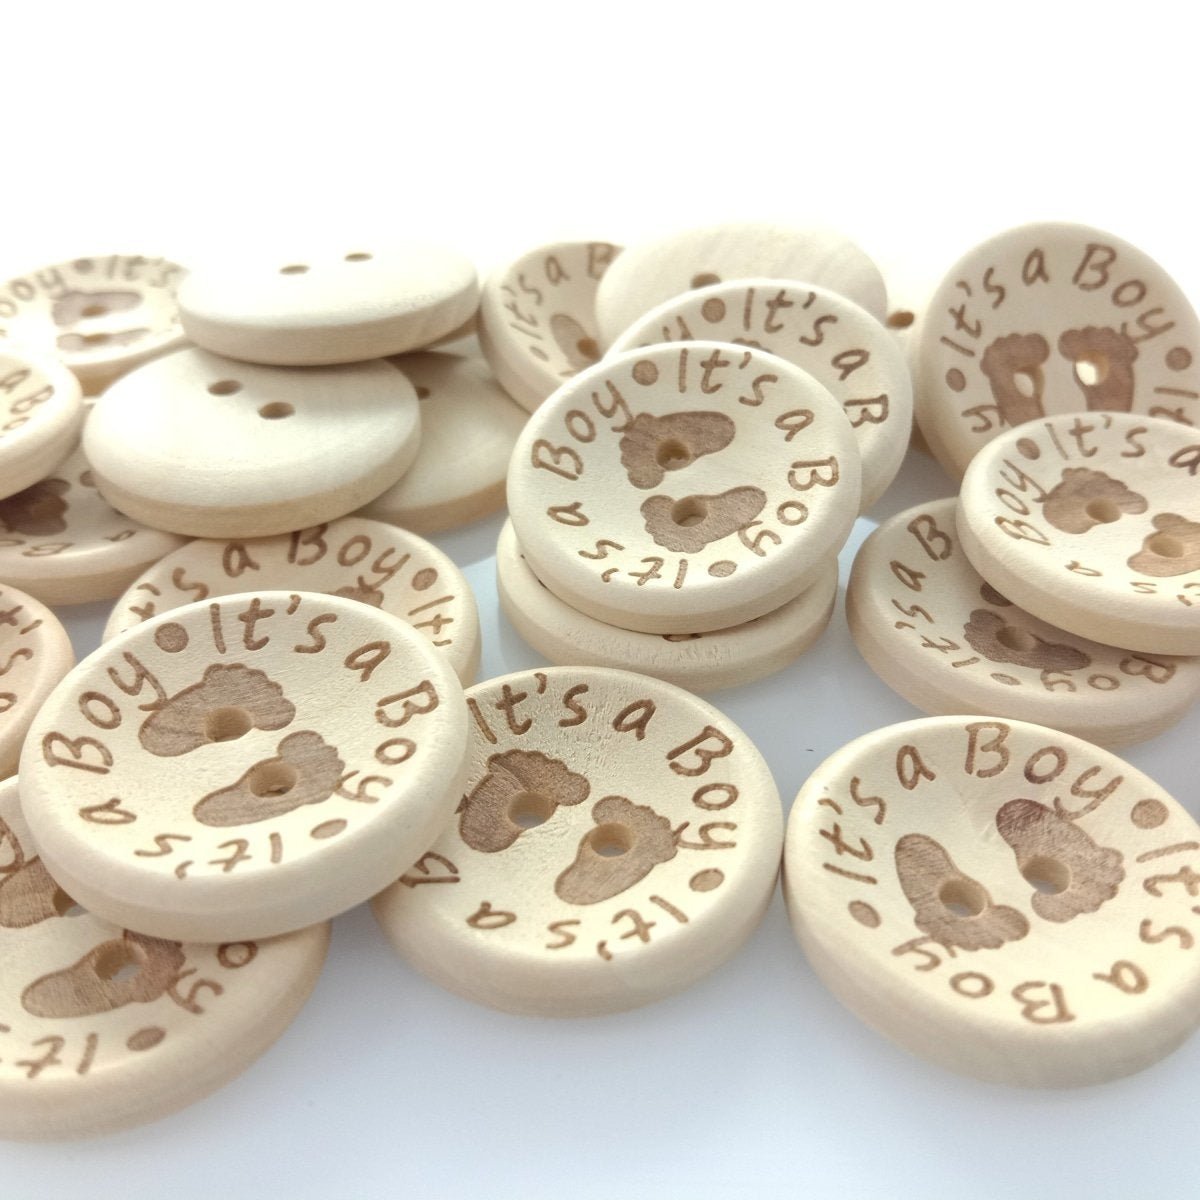 15/20/25mm It's a Girl/Boy Wooden Button Natural Wood Sewing Baby Clothing Buttons - It's a Boy 25mm 30pcs - - Asia Sell